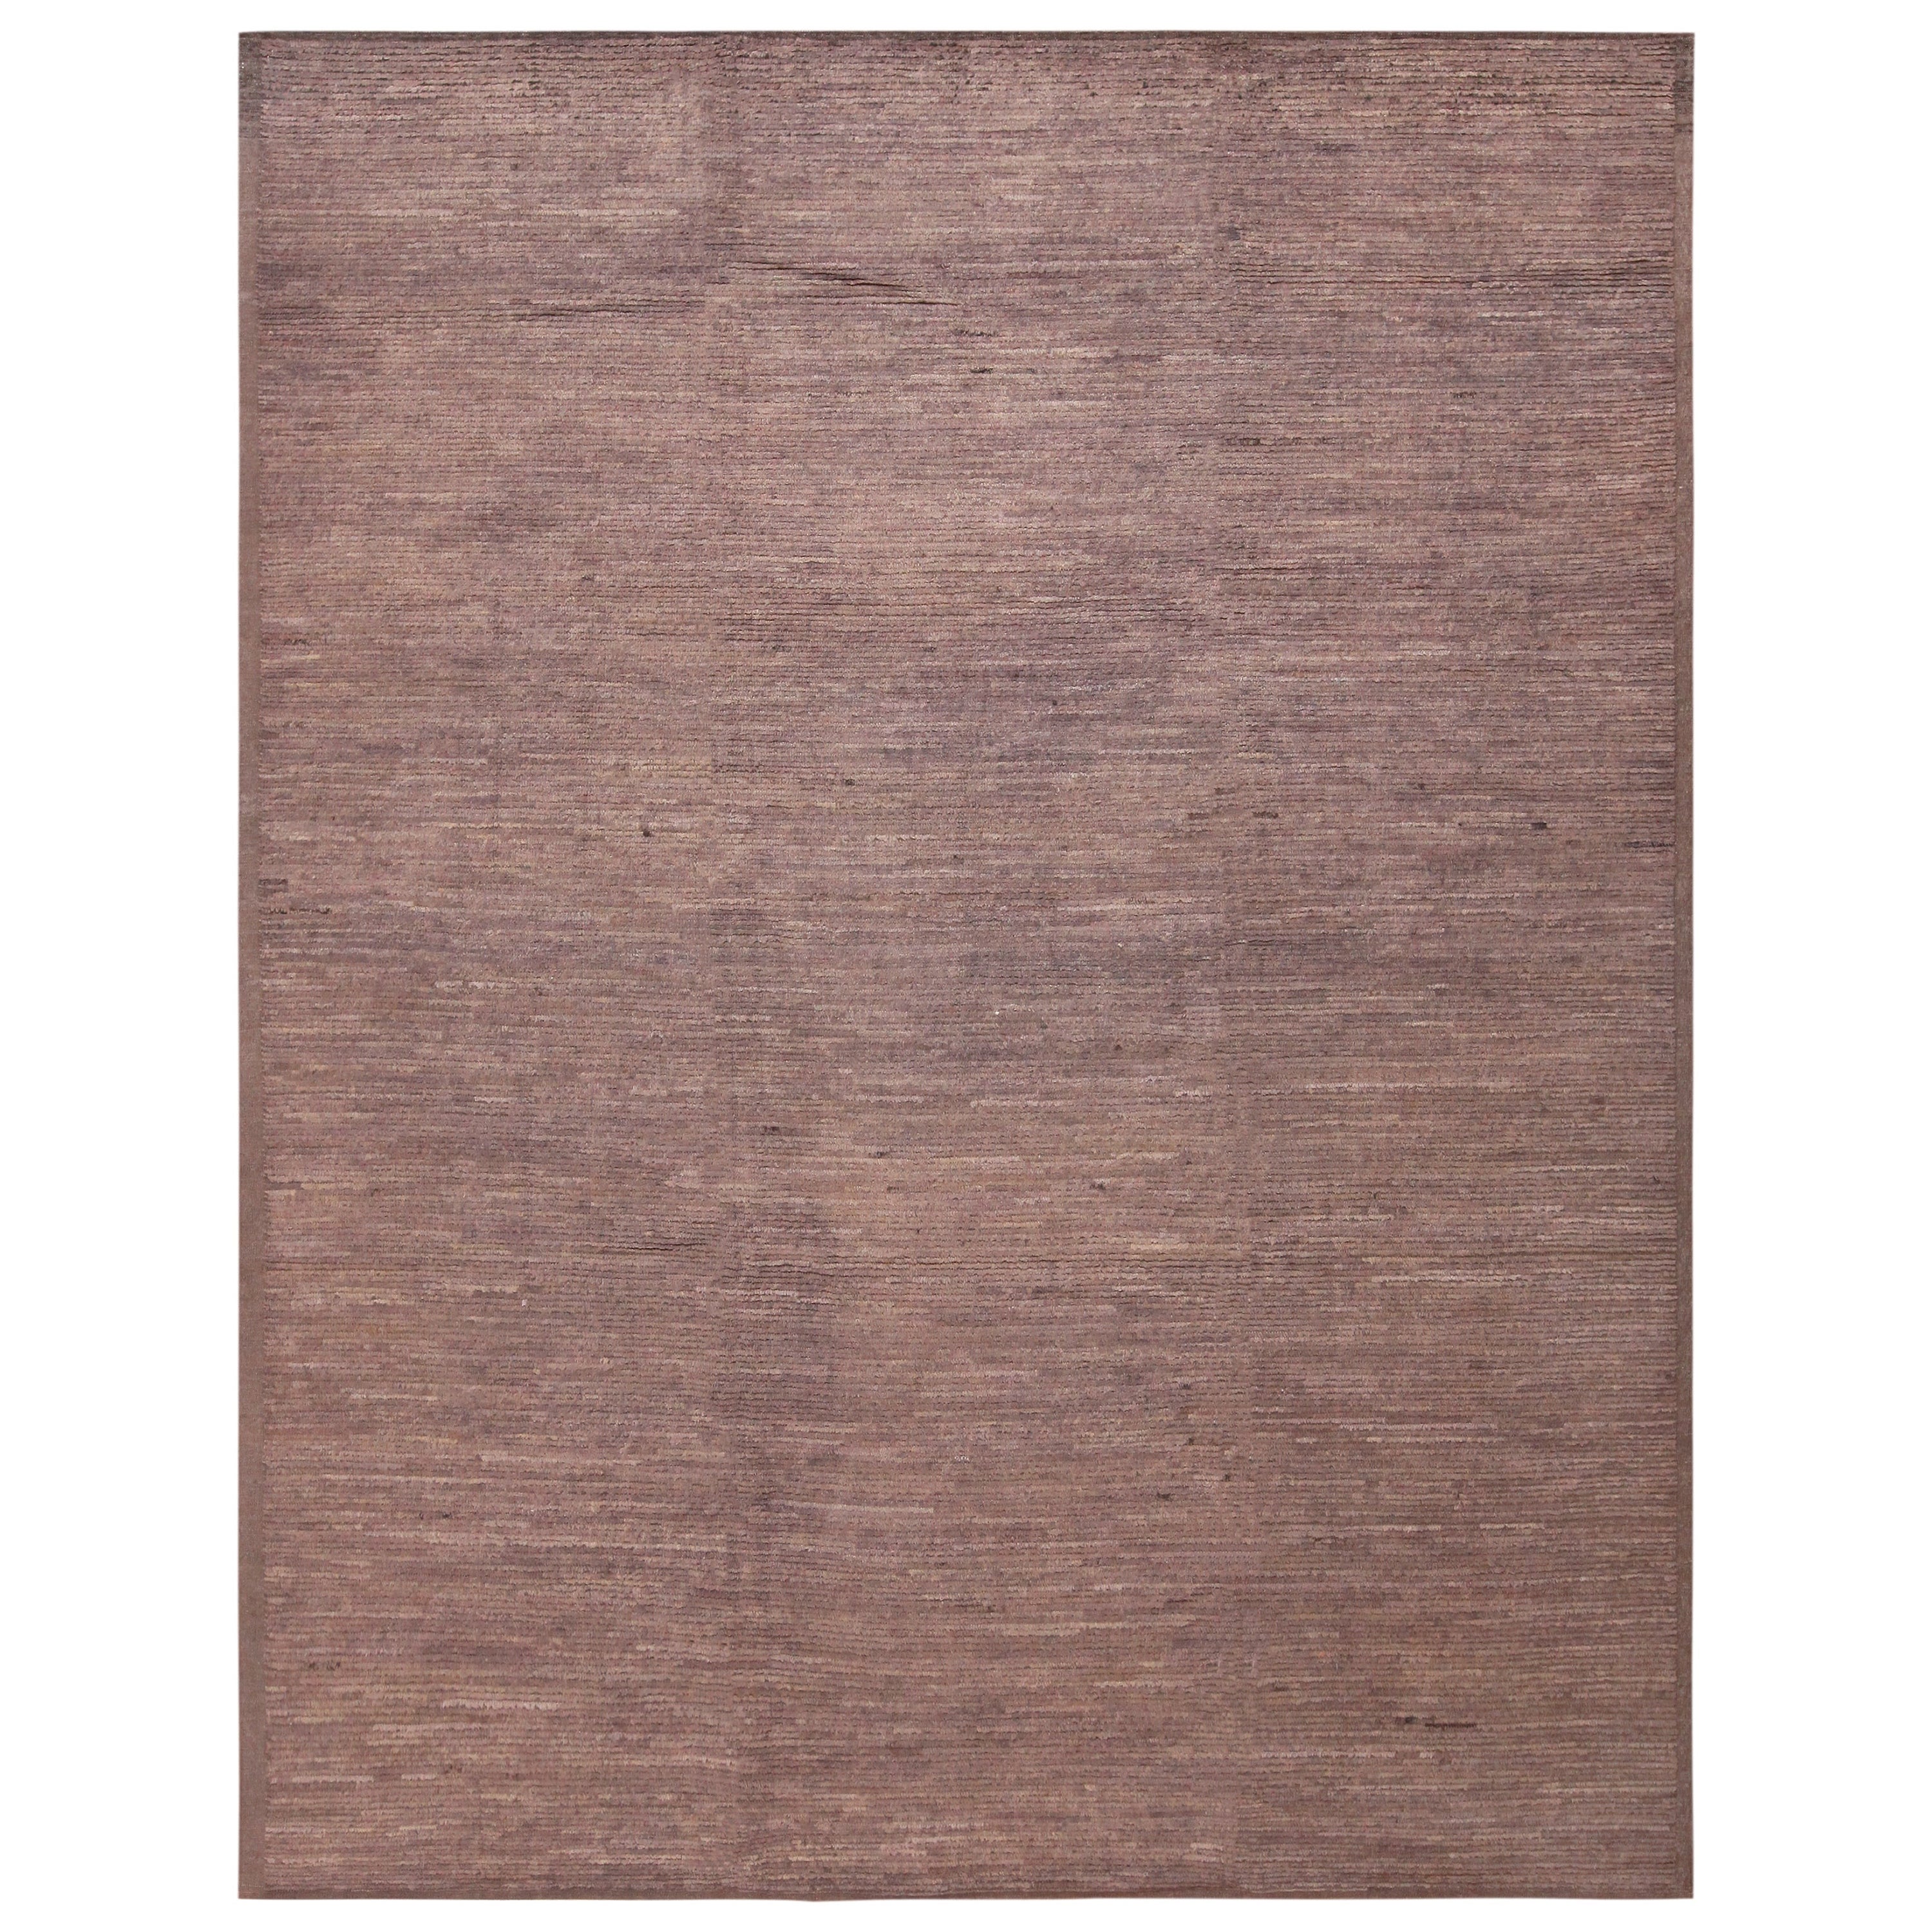 Nazmiyal Collection Decorative Modern Minimalist Rug. 9 ft 6 in x 12 ft